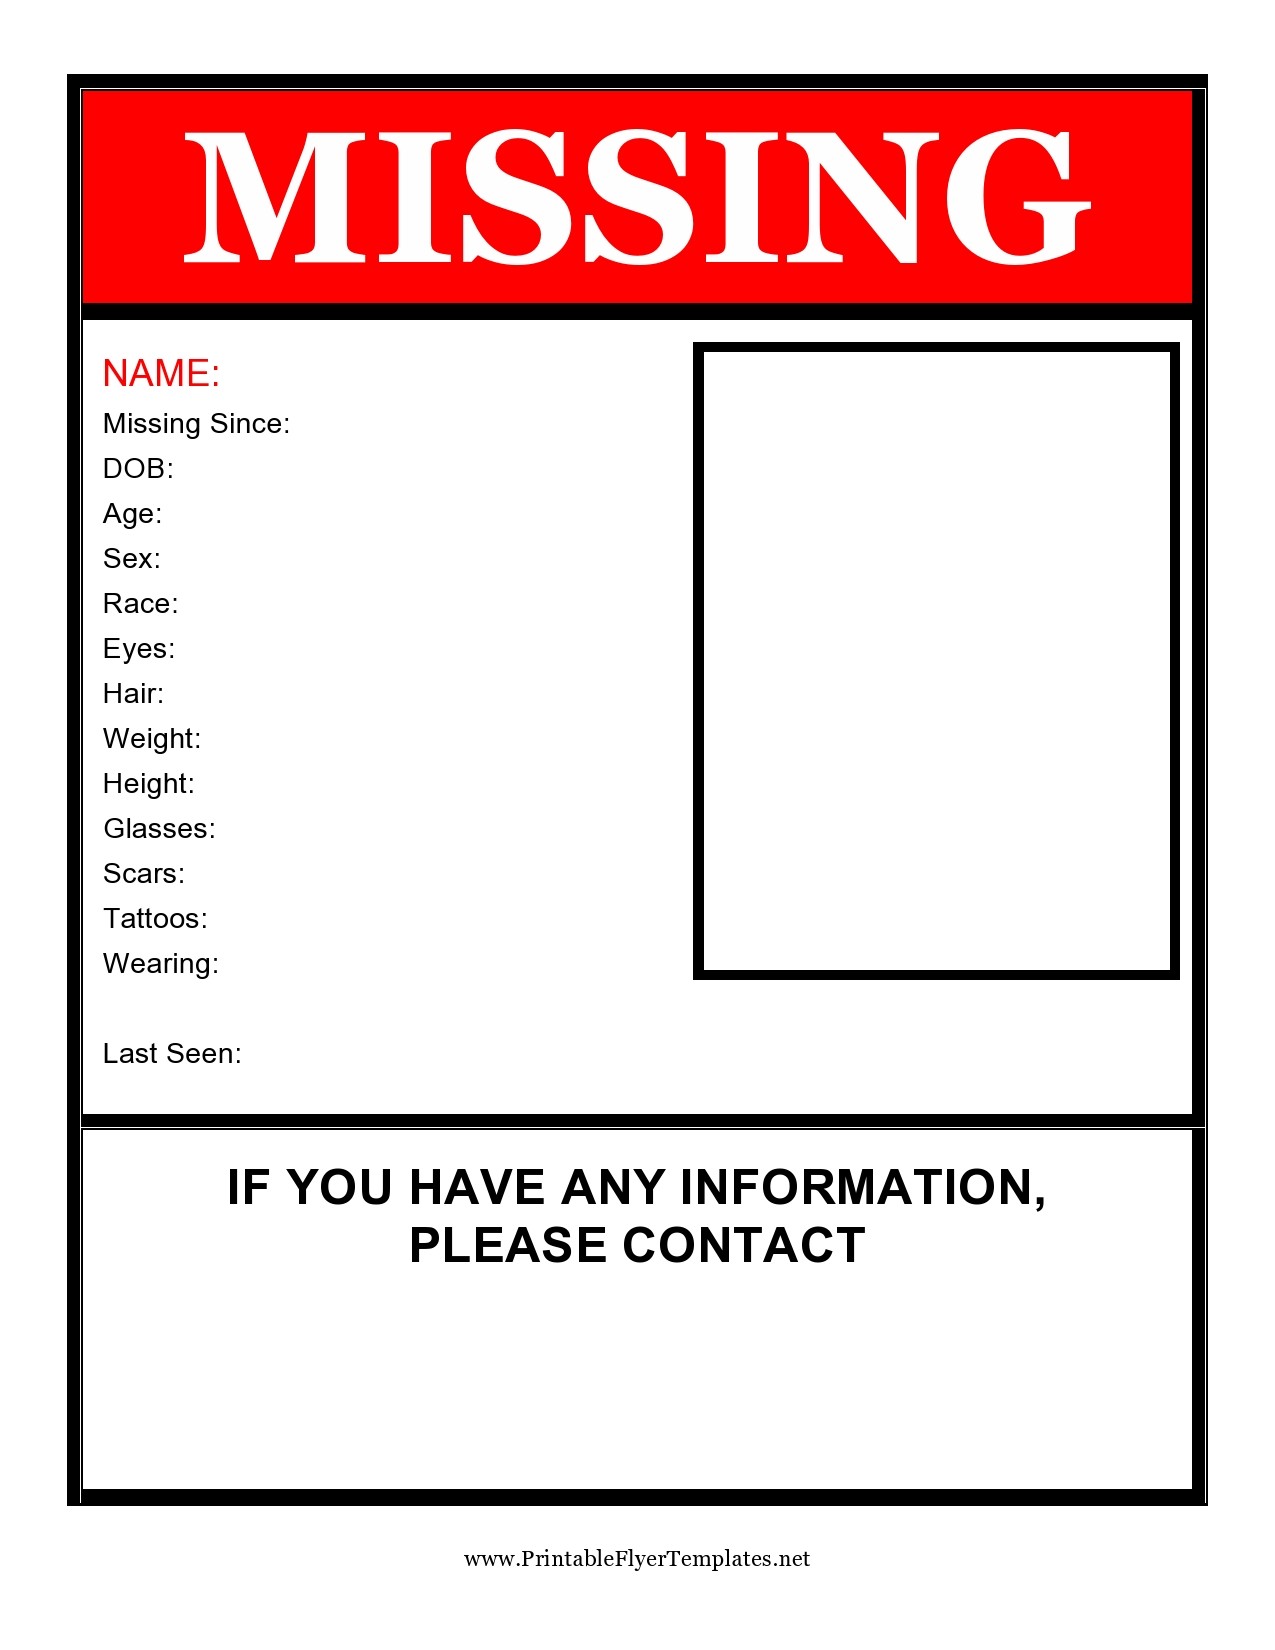 Free missing poster template 14